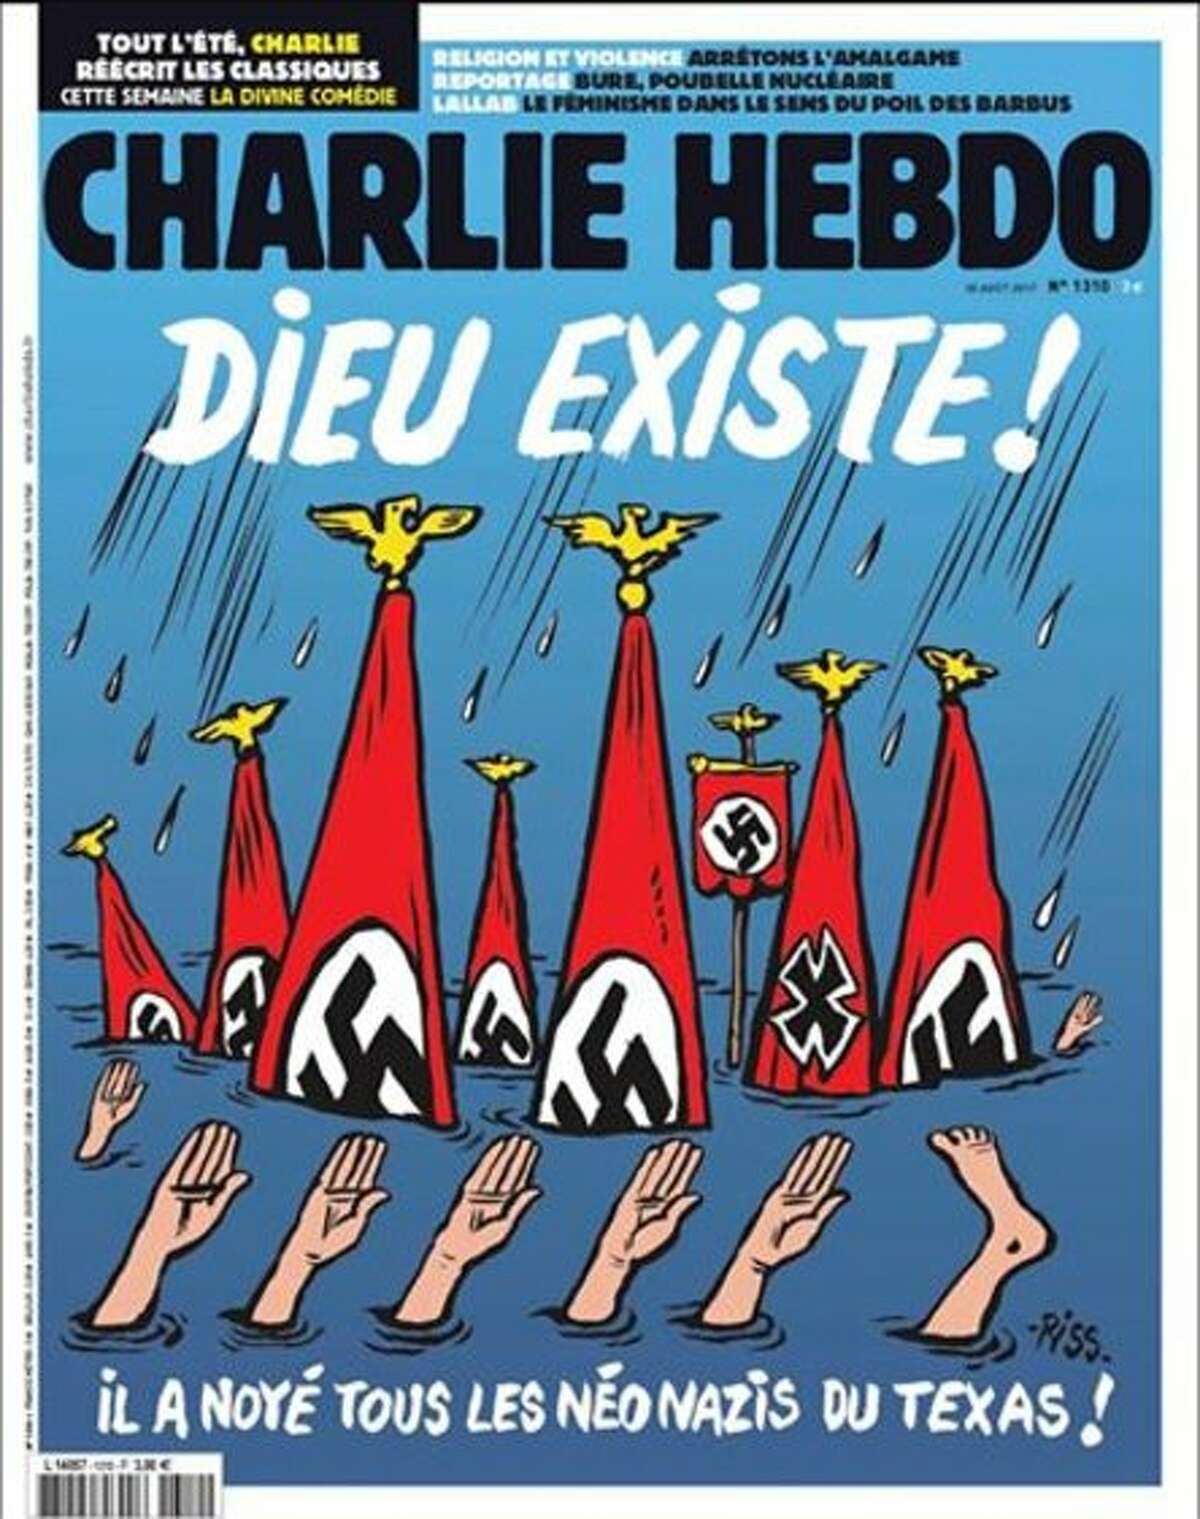 Satirical French magazine Charlie Hebdo drew strong condemnation for an illustrated cover that portrayed Hurricane Harvey victims in Texas as Nazis and racists on Aug. 31, 2017. READ MORE: French magazine shows Harvey drowning neo-Nazis in Texas